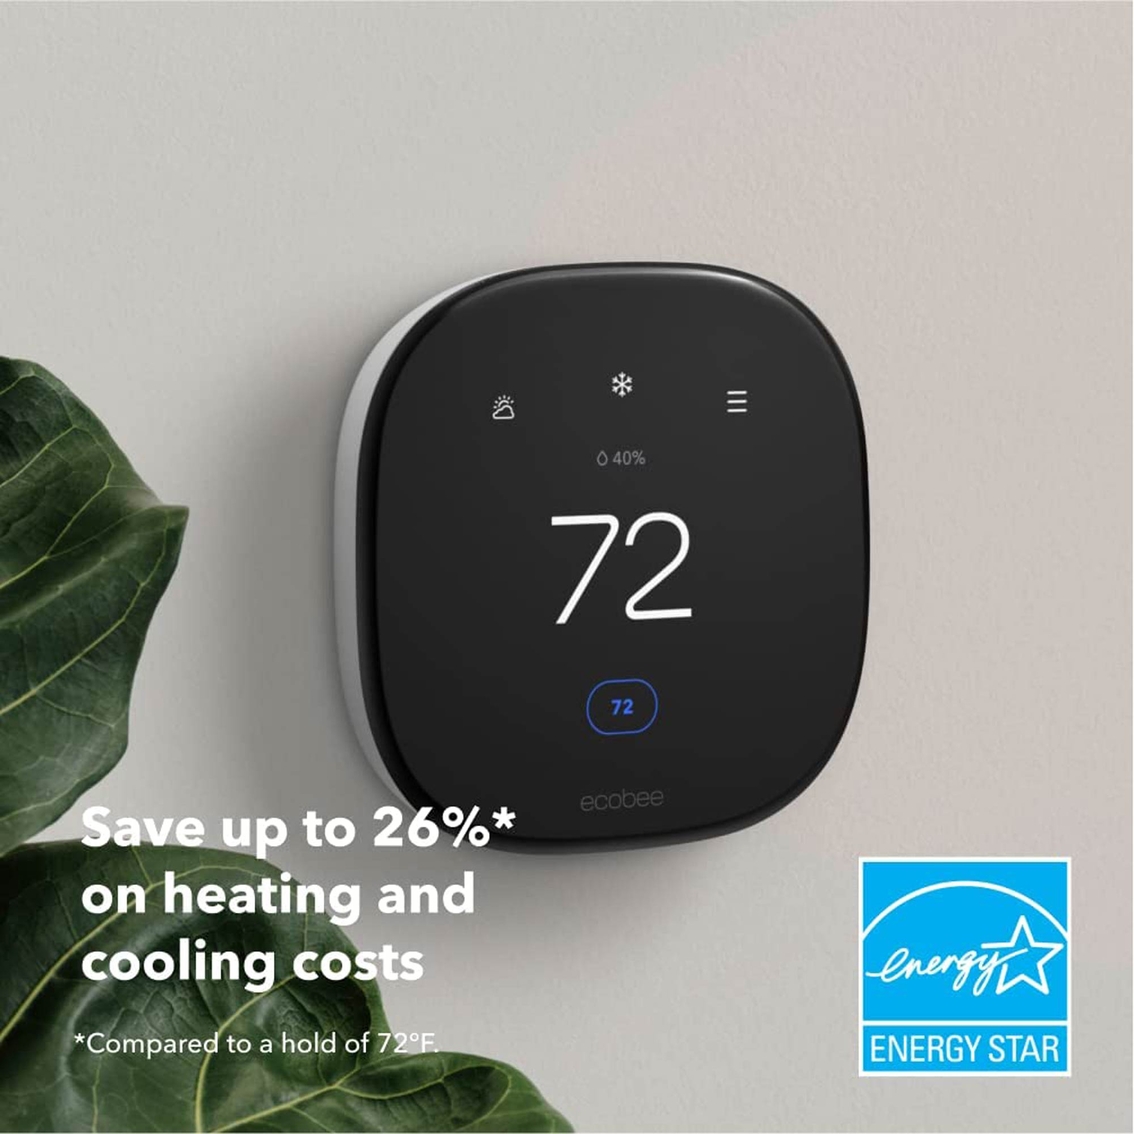 Ecobee Enhanced Smart Programmable Touch Screen WiFi Thermostat - Image 2 of 9